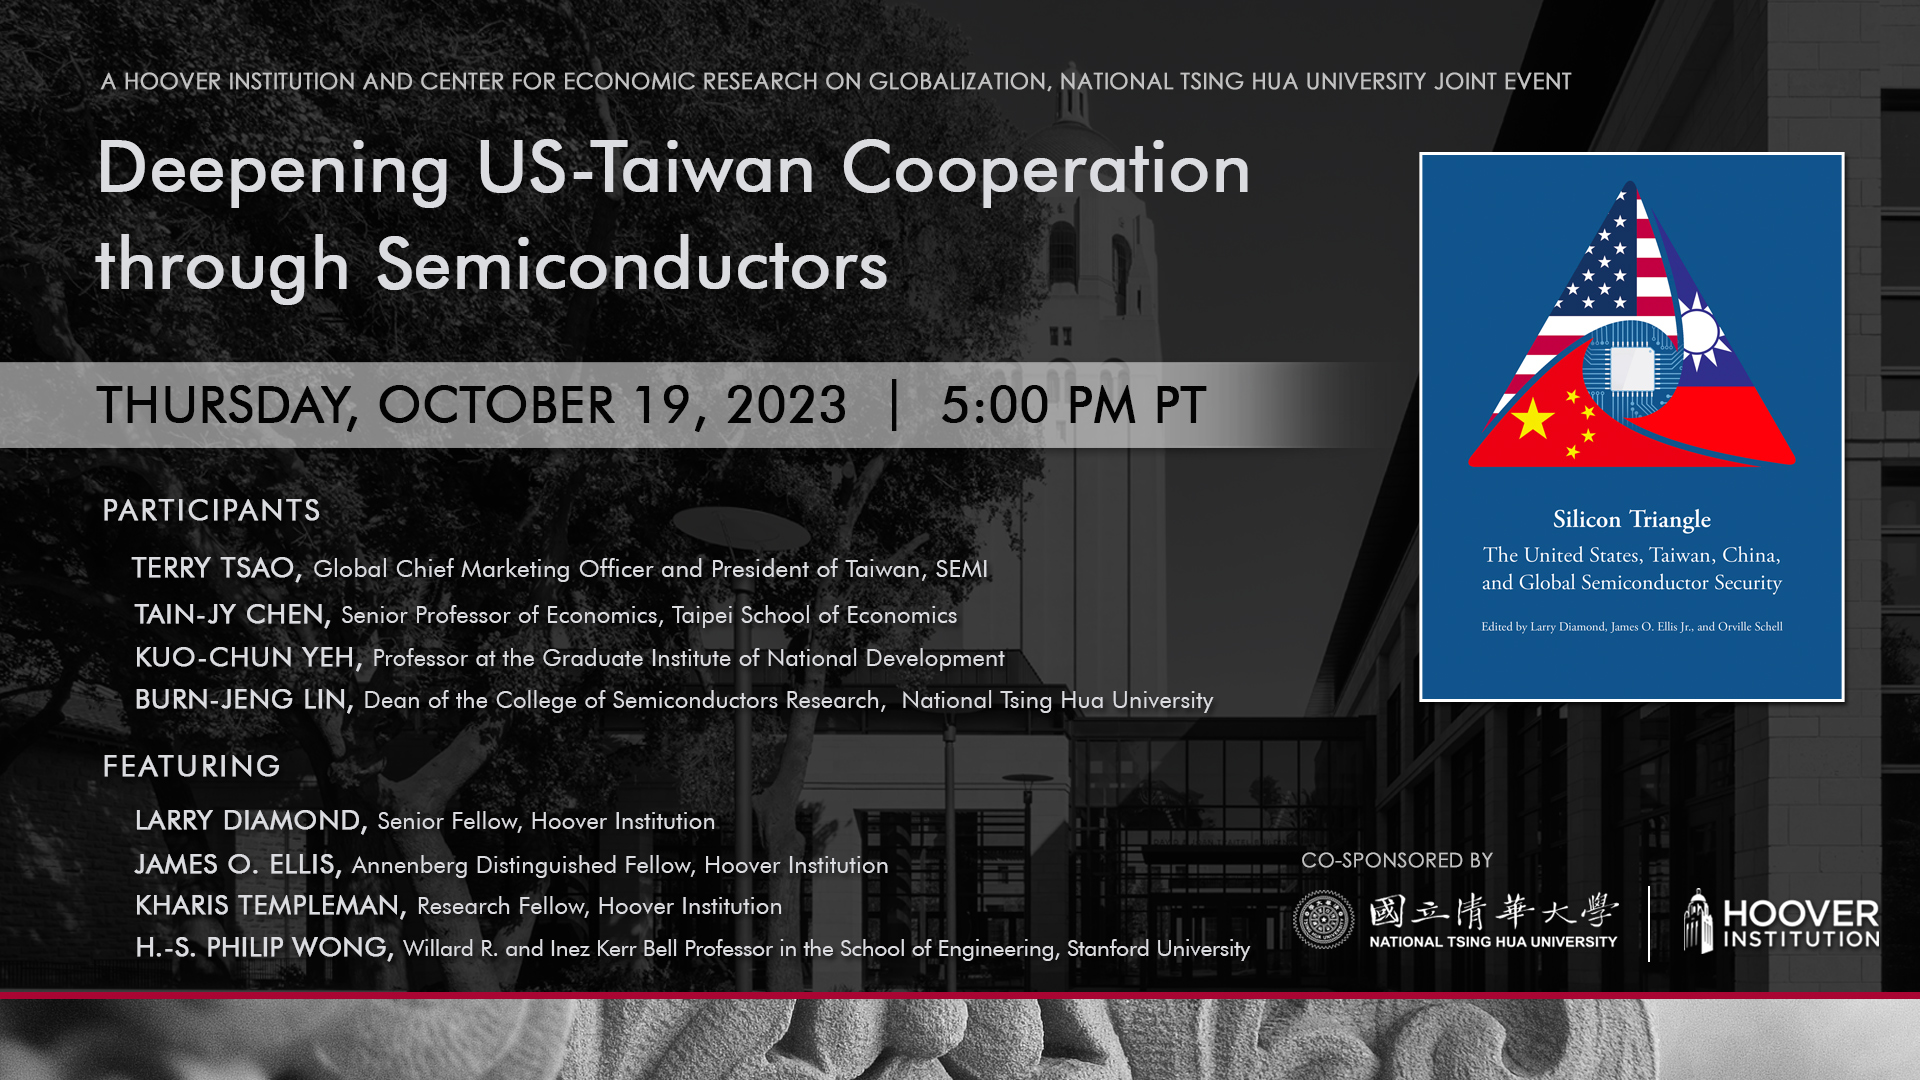 Deepening US-Taiwan Cooperation through Semiconductors